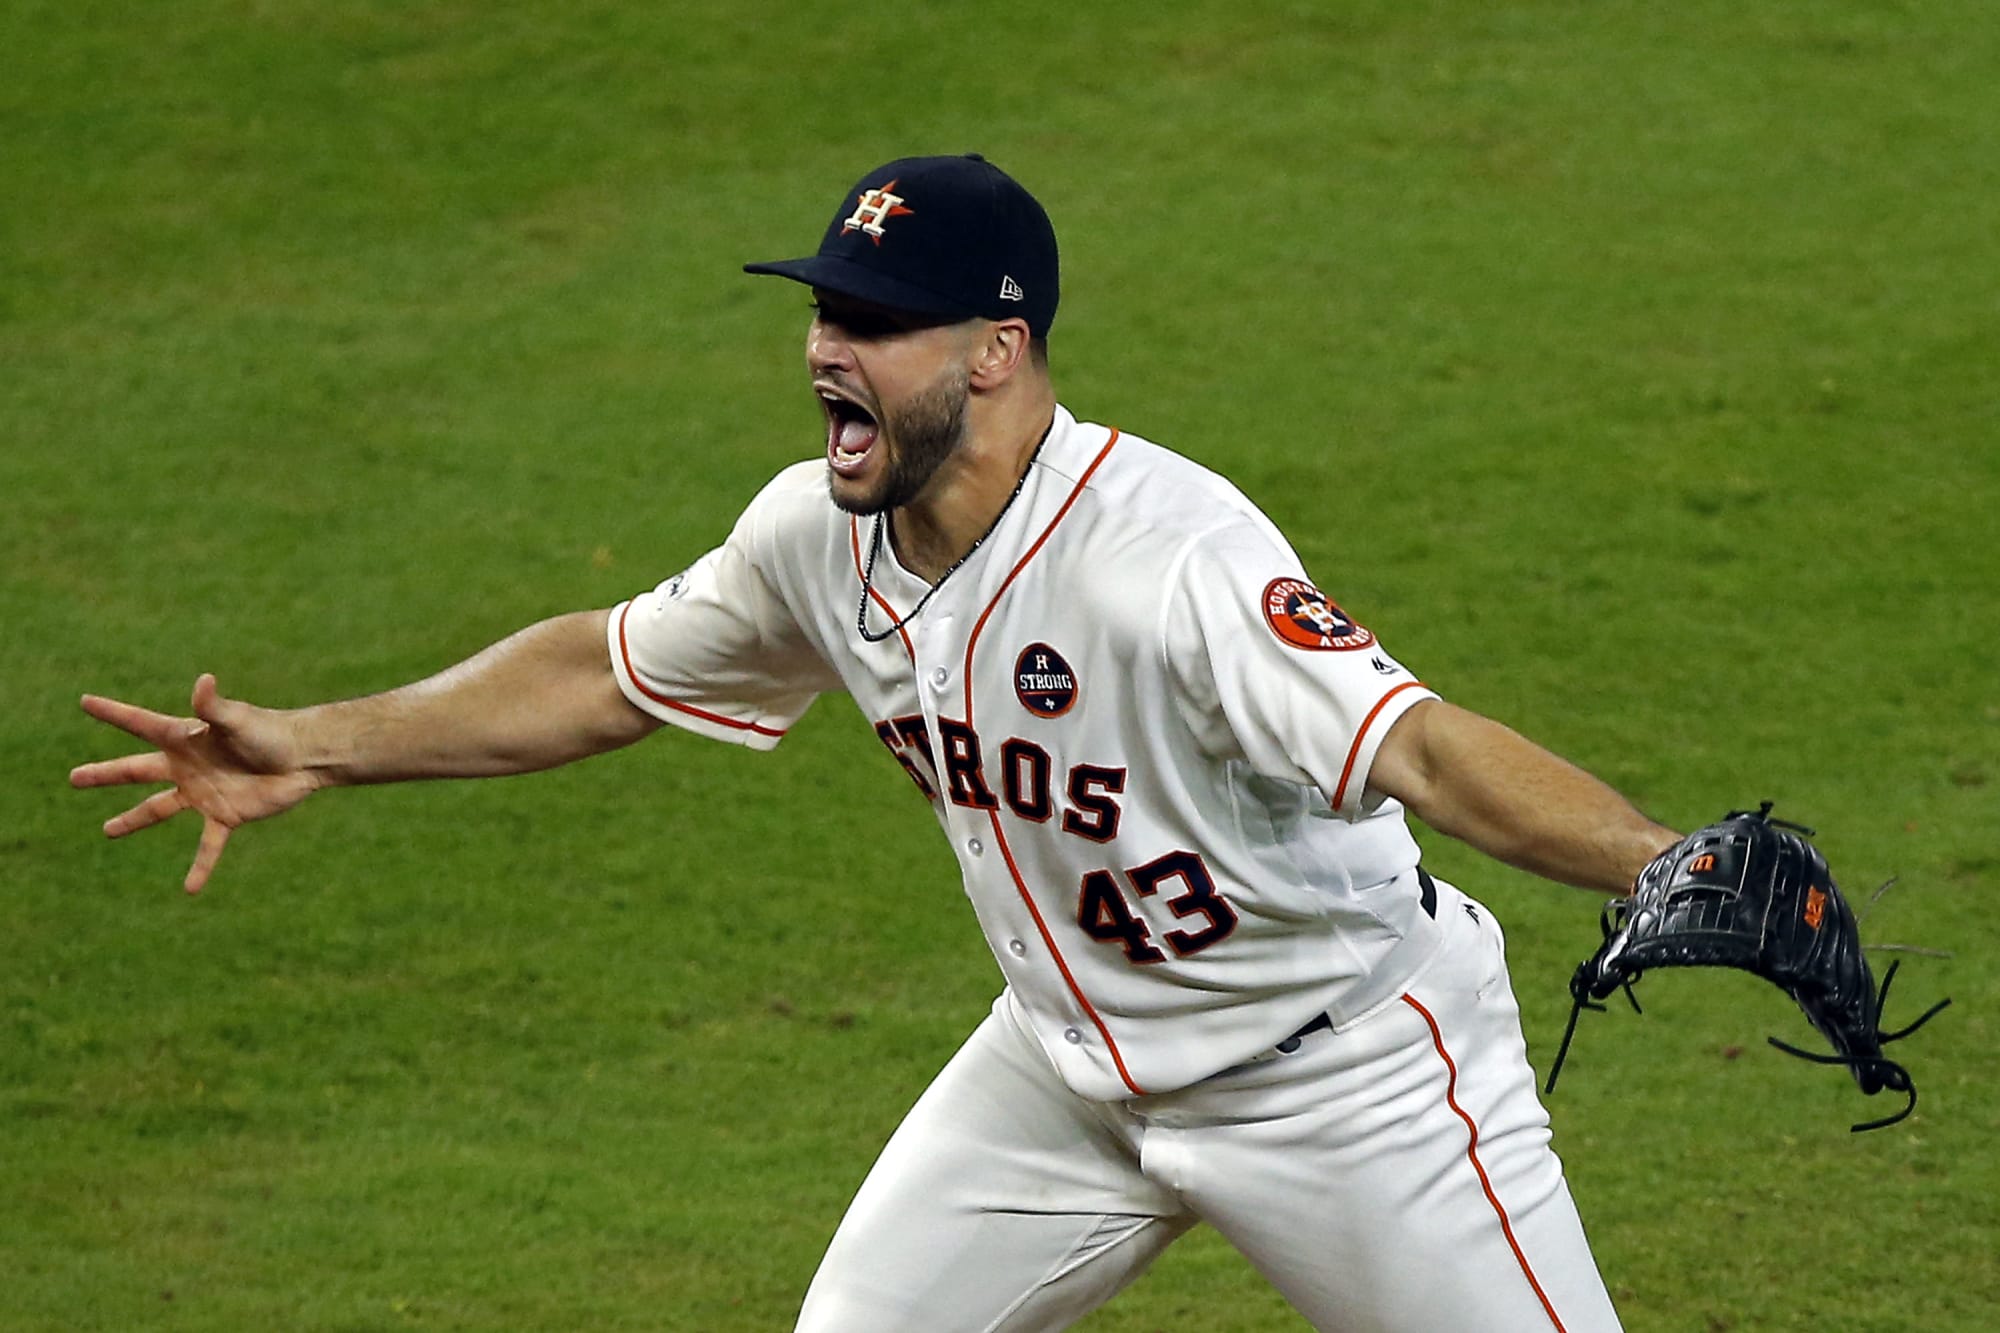 Houston Astros: It's finally redemption time for Lance McCullers Jr.